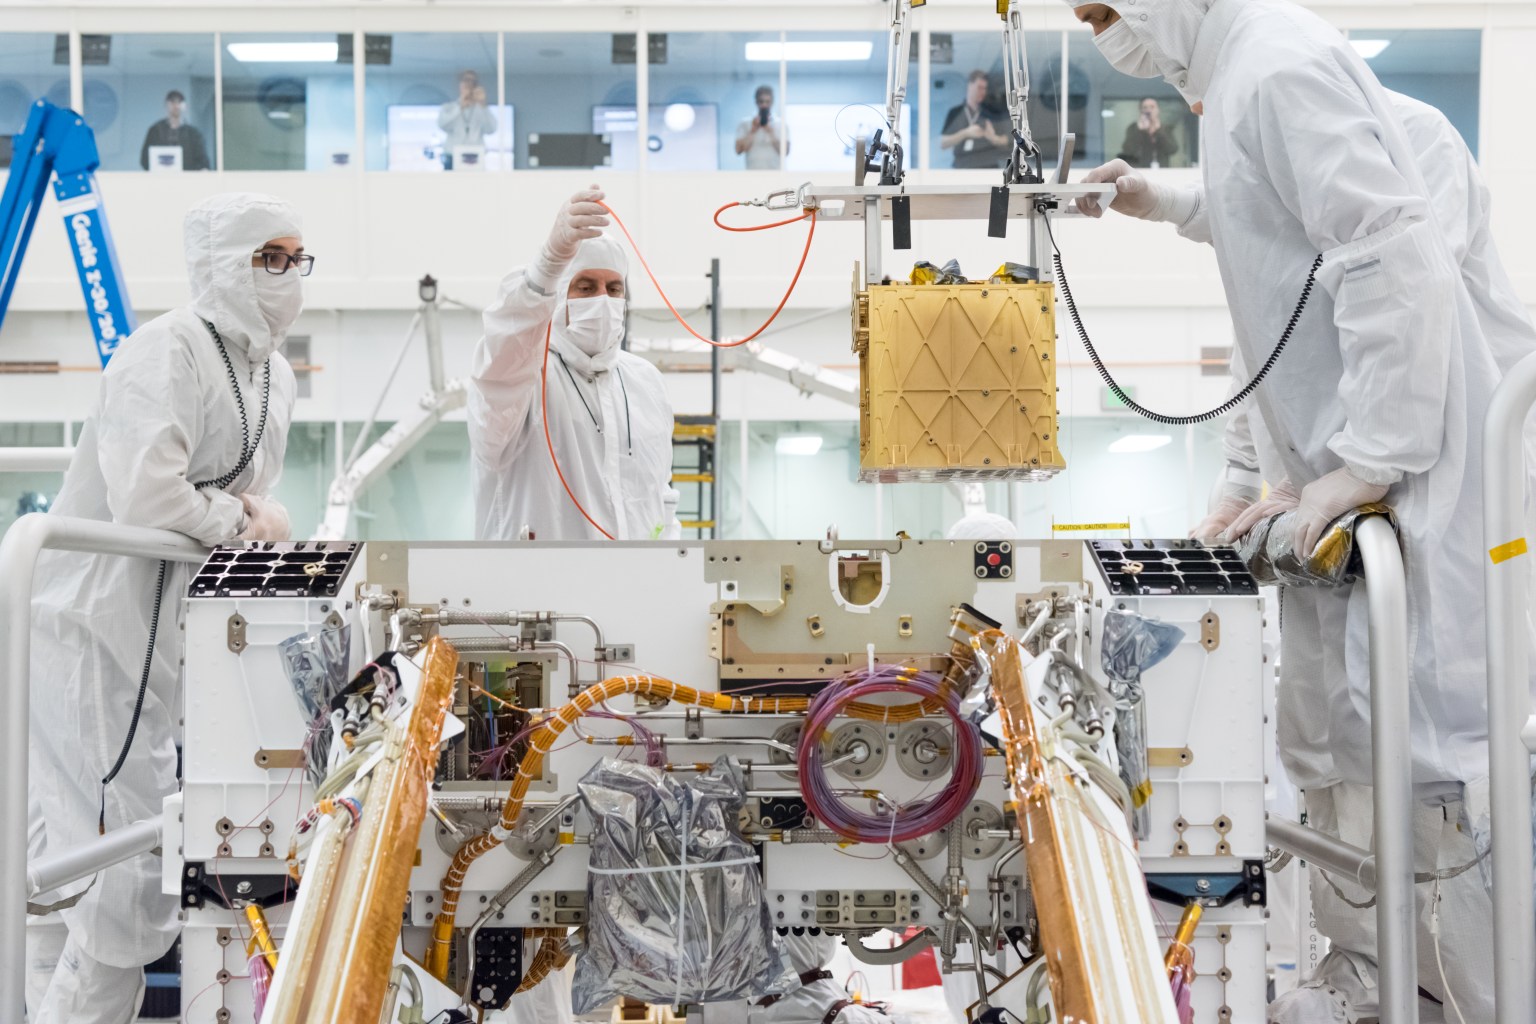 Members of NASA’s Mars 2020 project install the Mars Oxygen In-Situ Resource Utilization Experiment (MOXIE) into the chassis of NASA’s next Mars rover